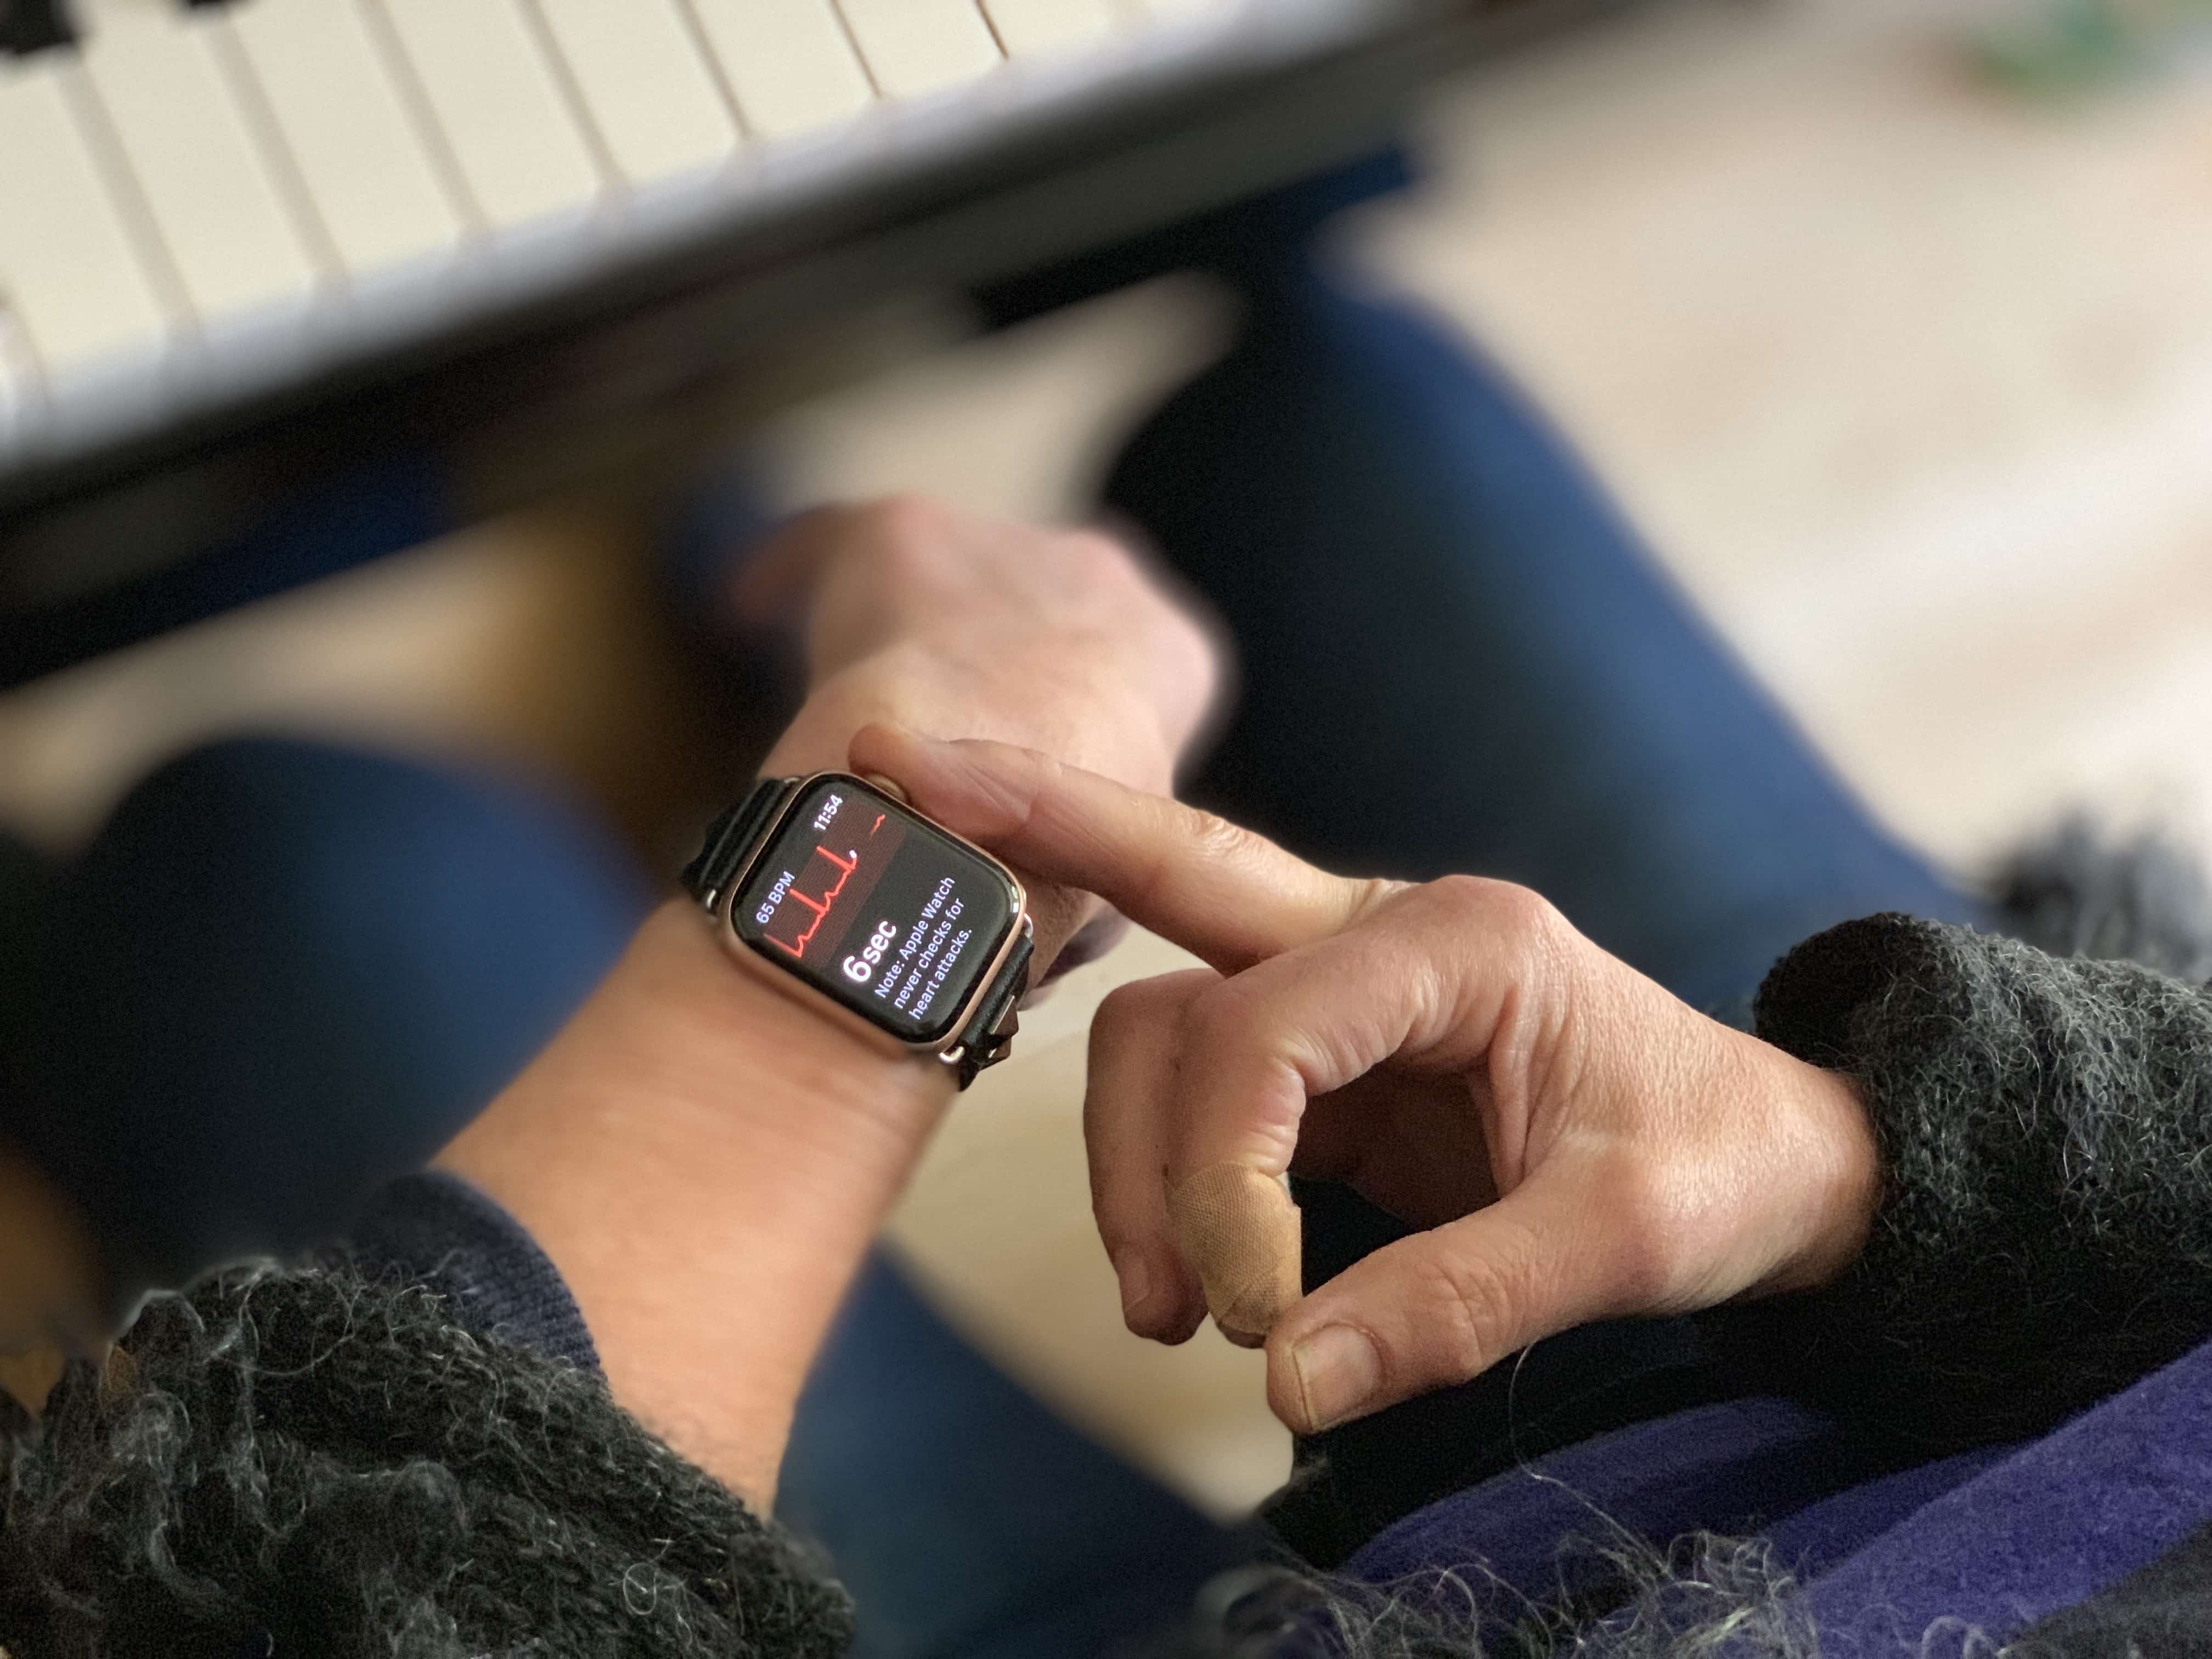 Apple Watch likely will gain new health-related features.